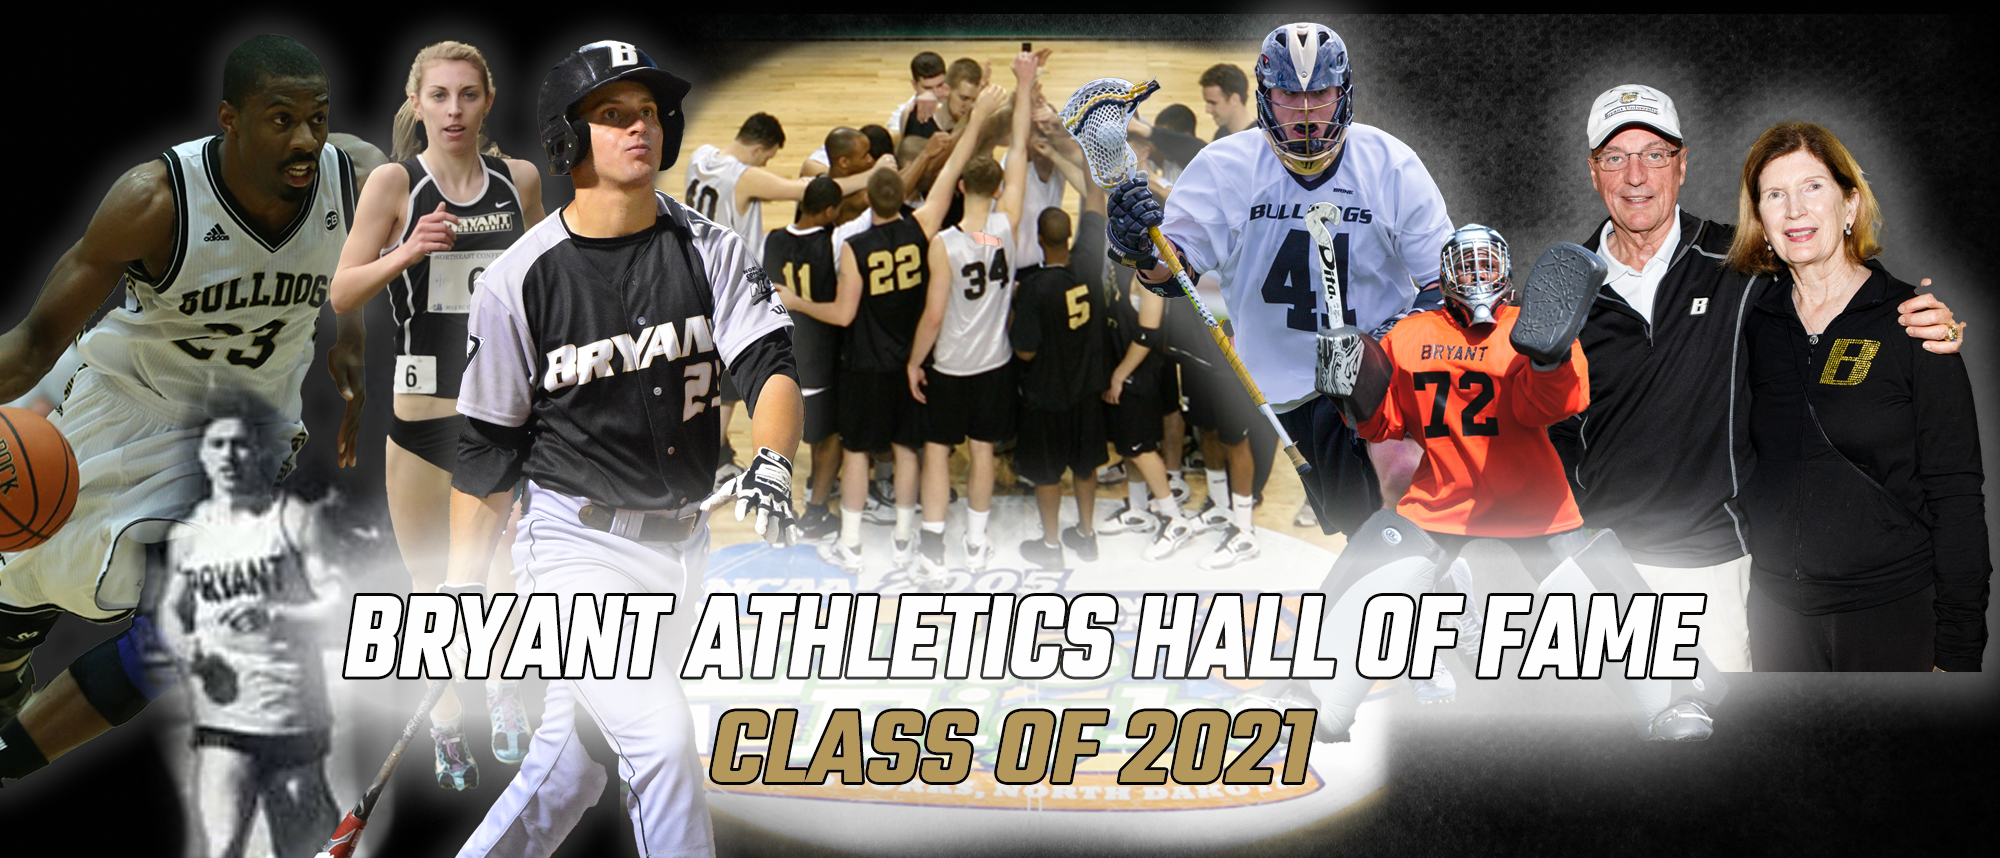 Bryant Athletics announces 2021 Hall of Fame Class